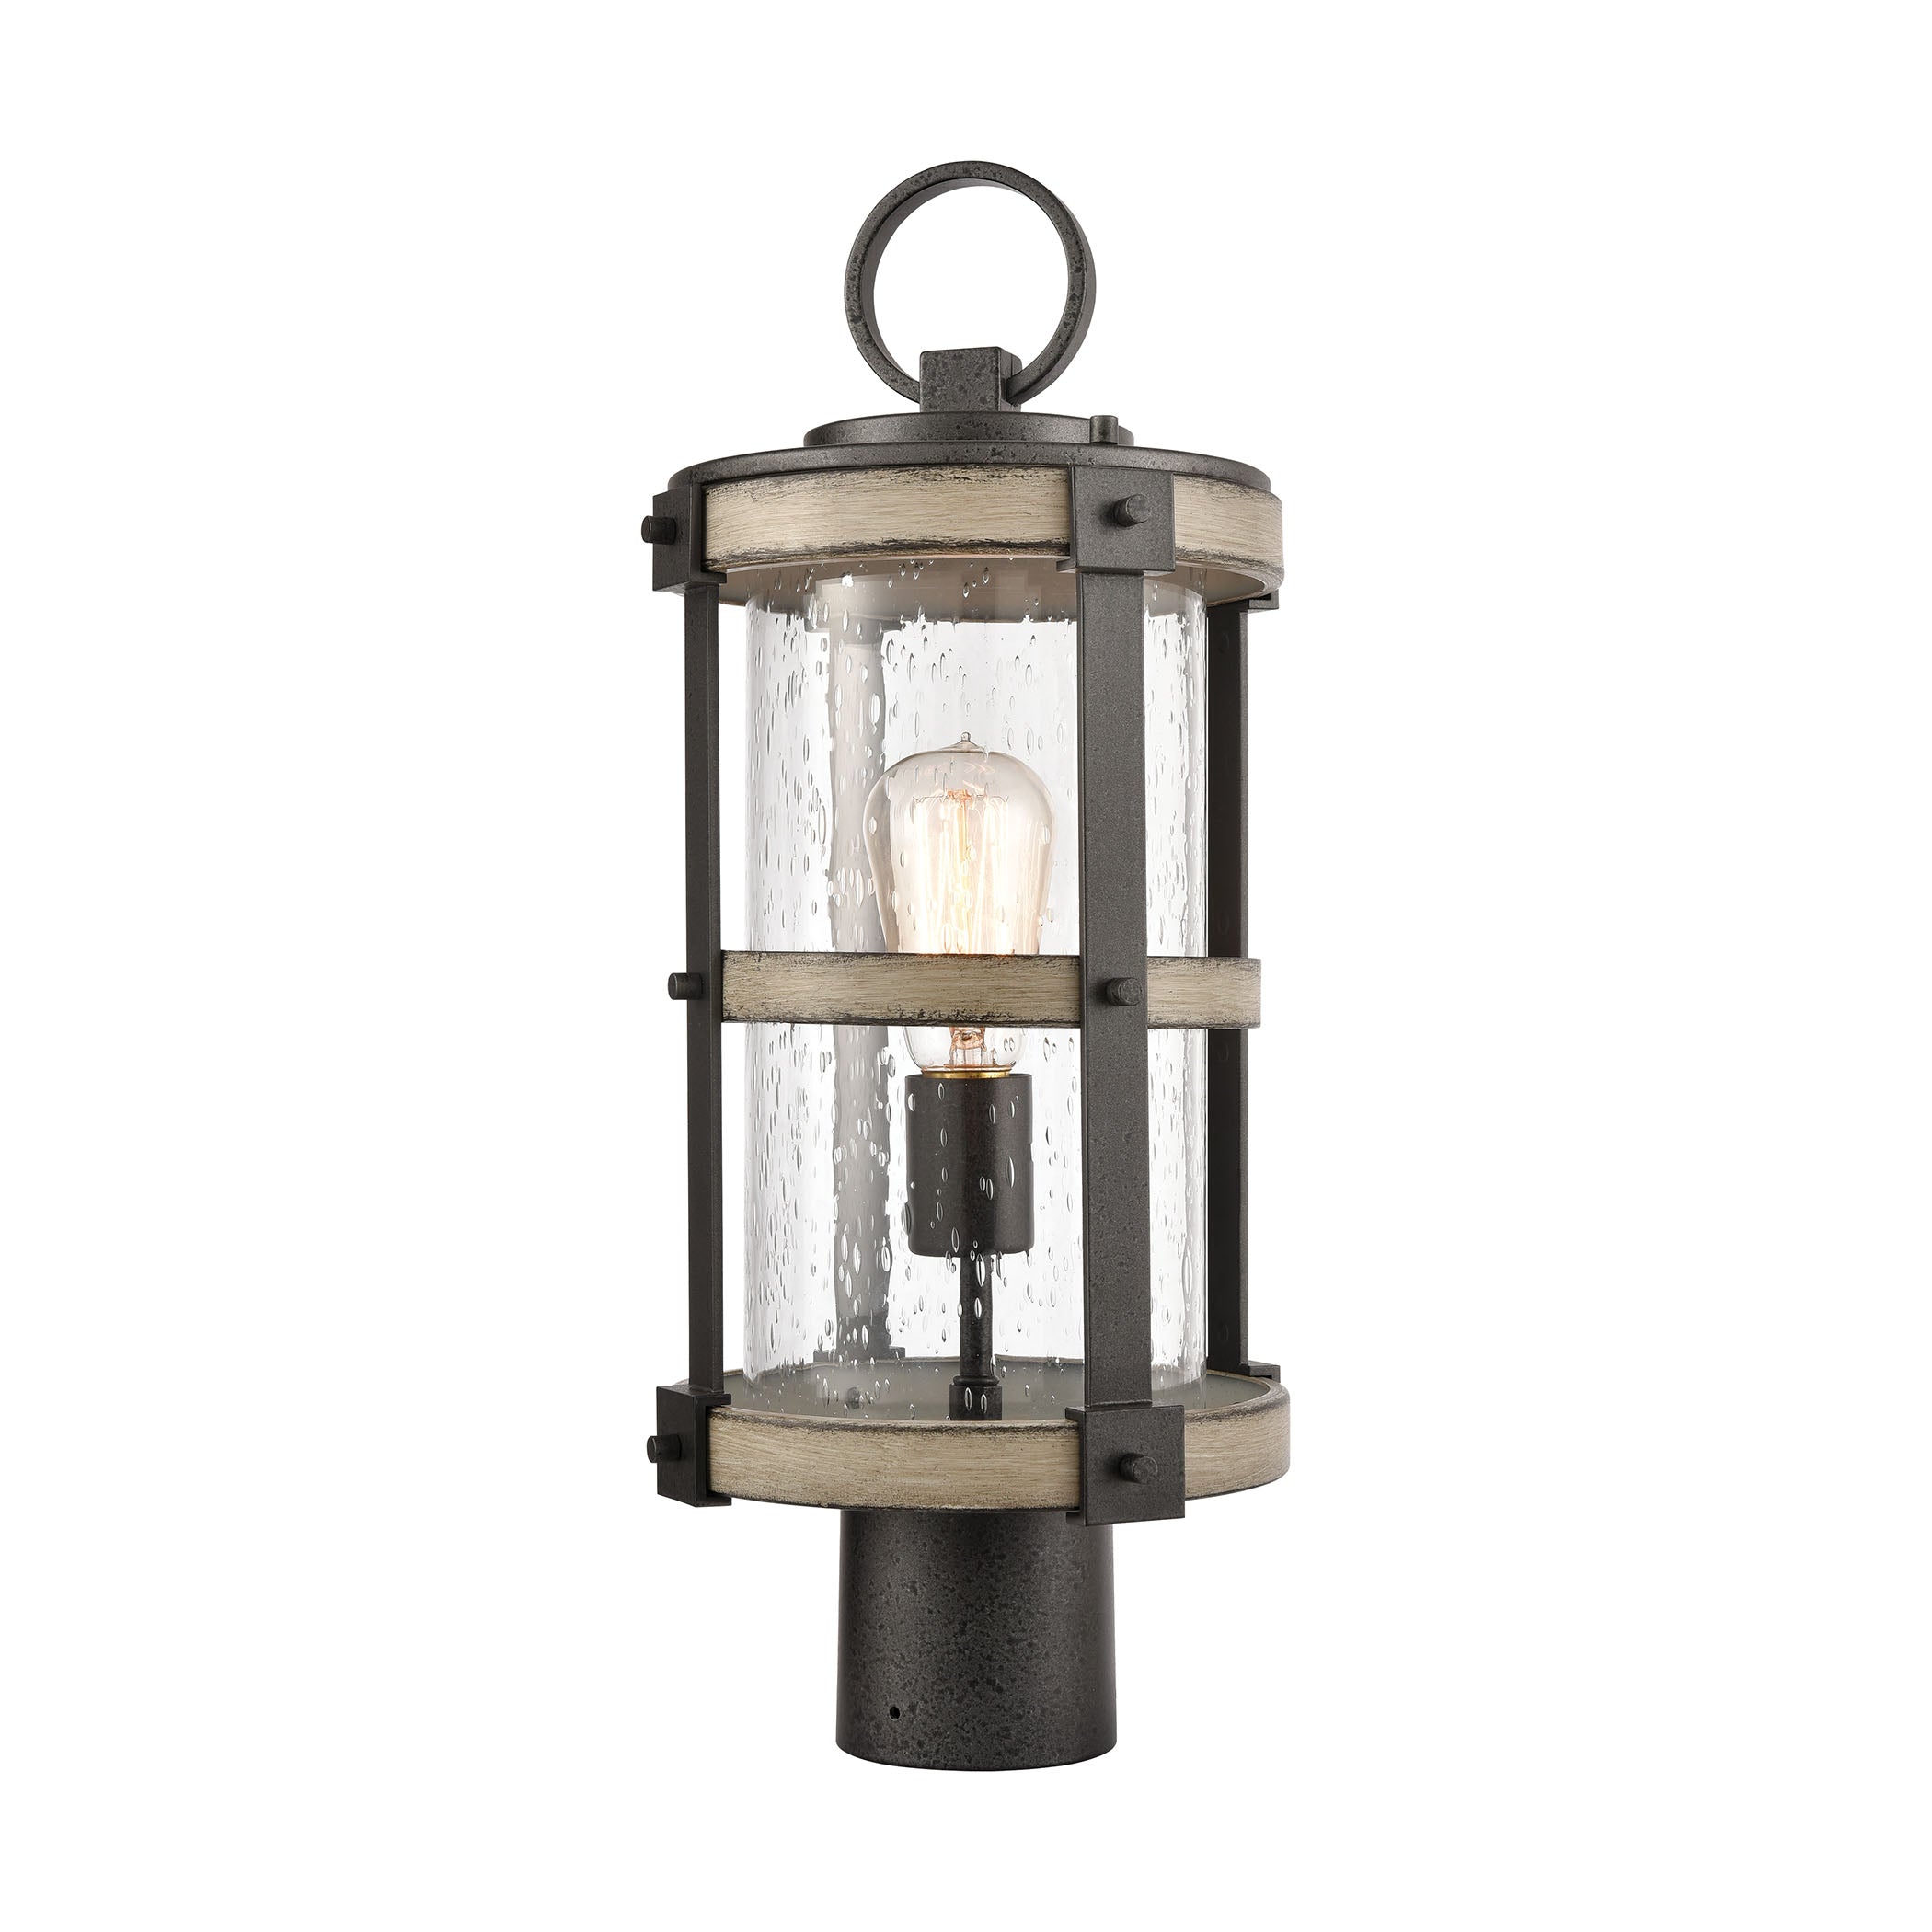 ELK Lighting 89148/1 Crenshaw 1-Light Outdoor Post Mount in Anvil Iron and Distressed Antique Graywood with Seedy Glass